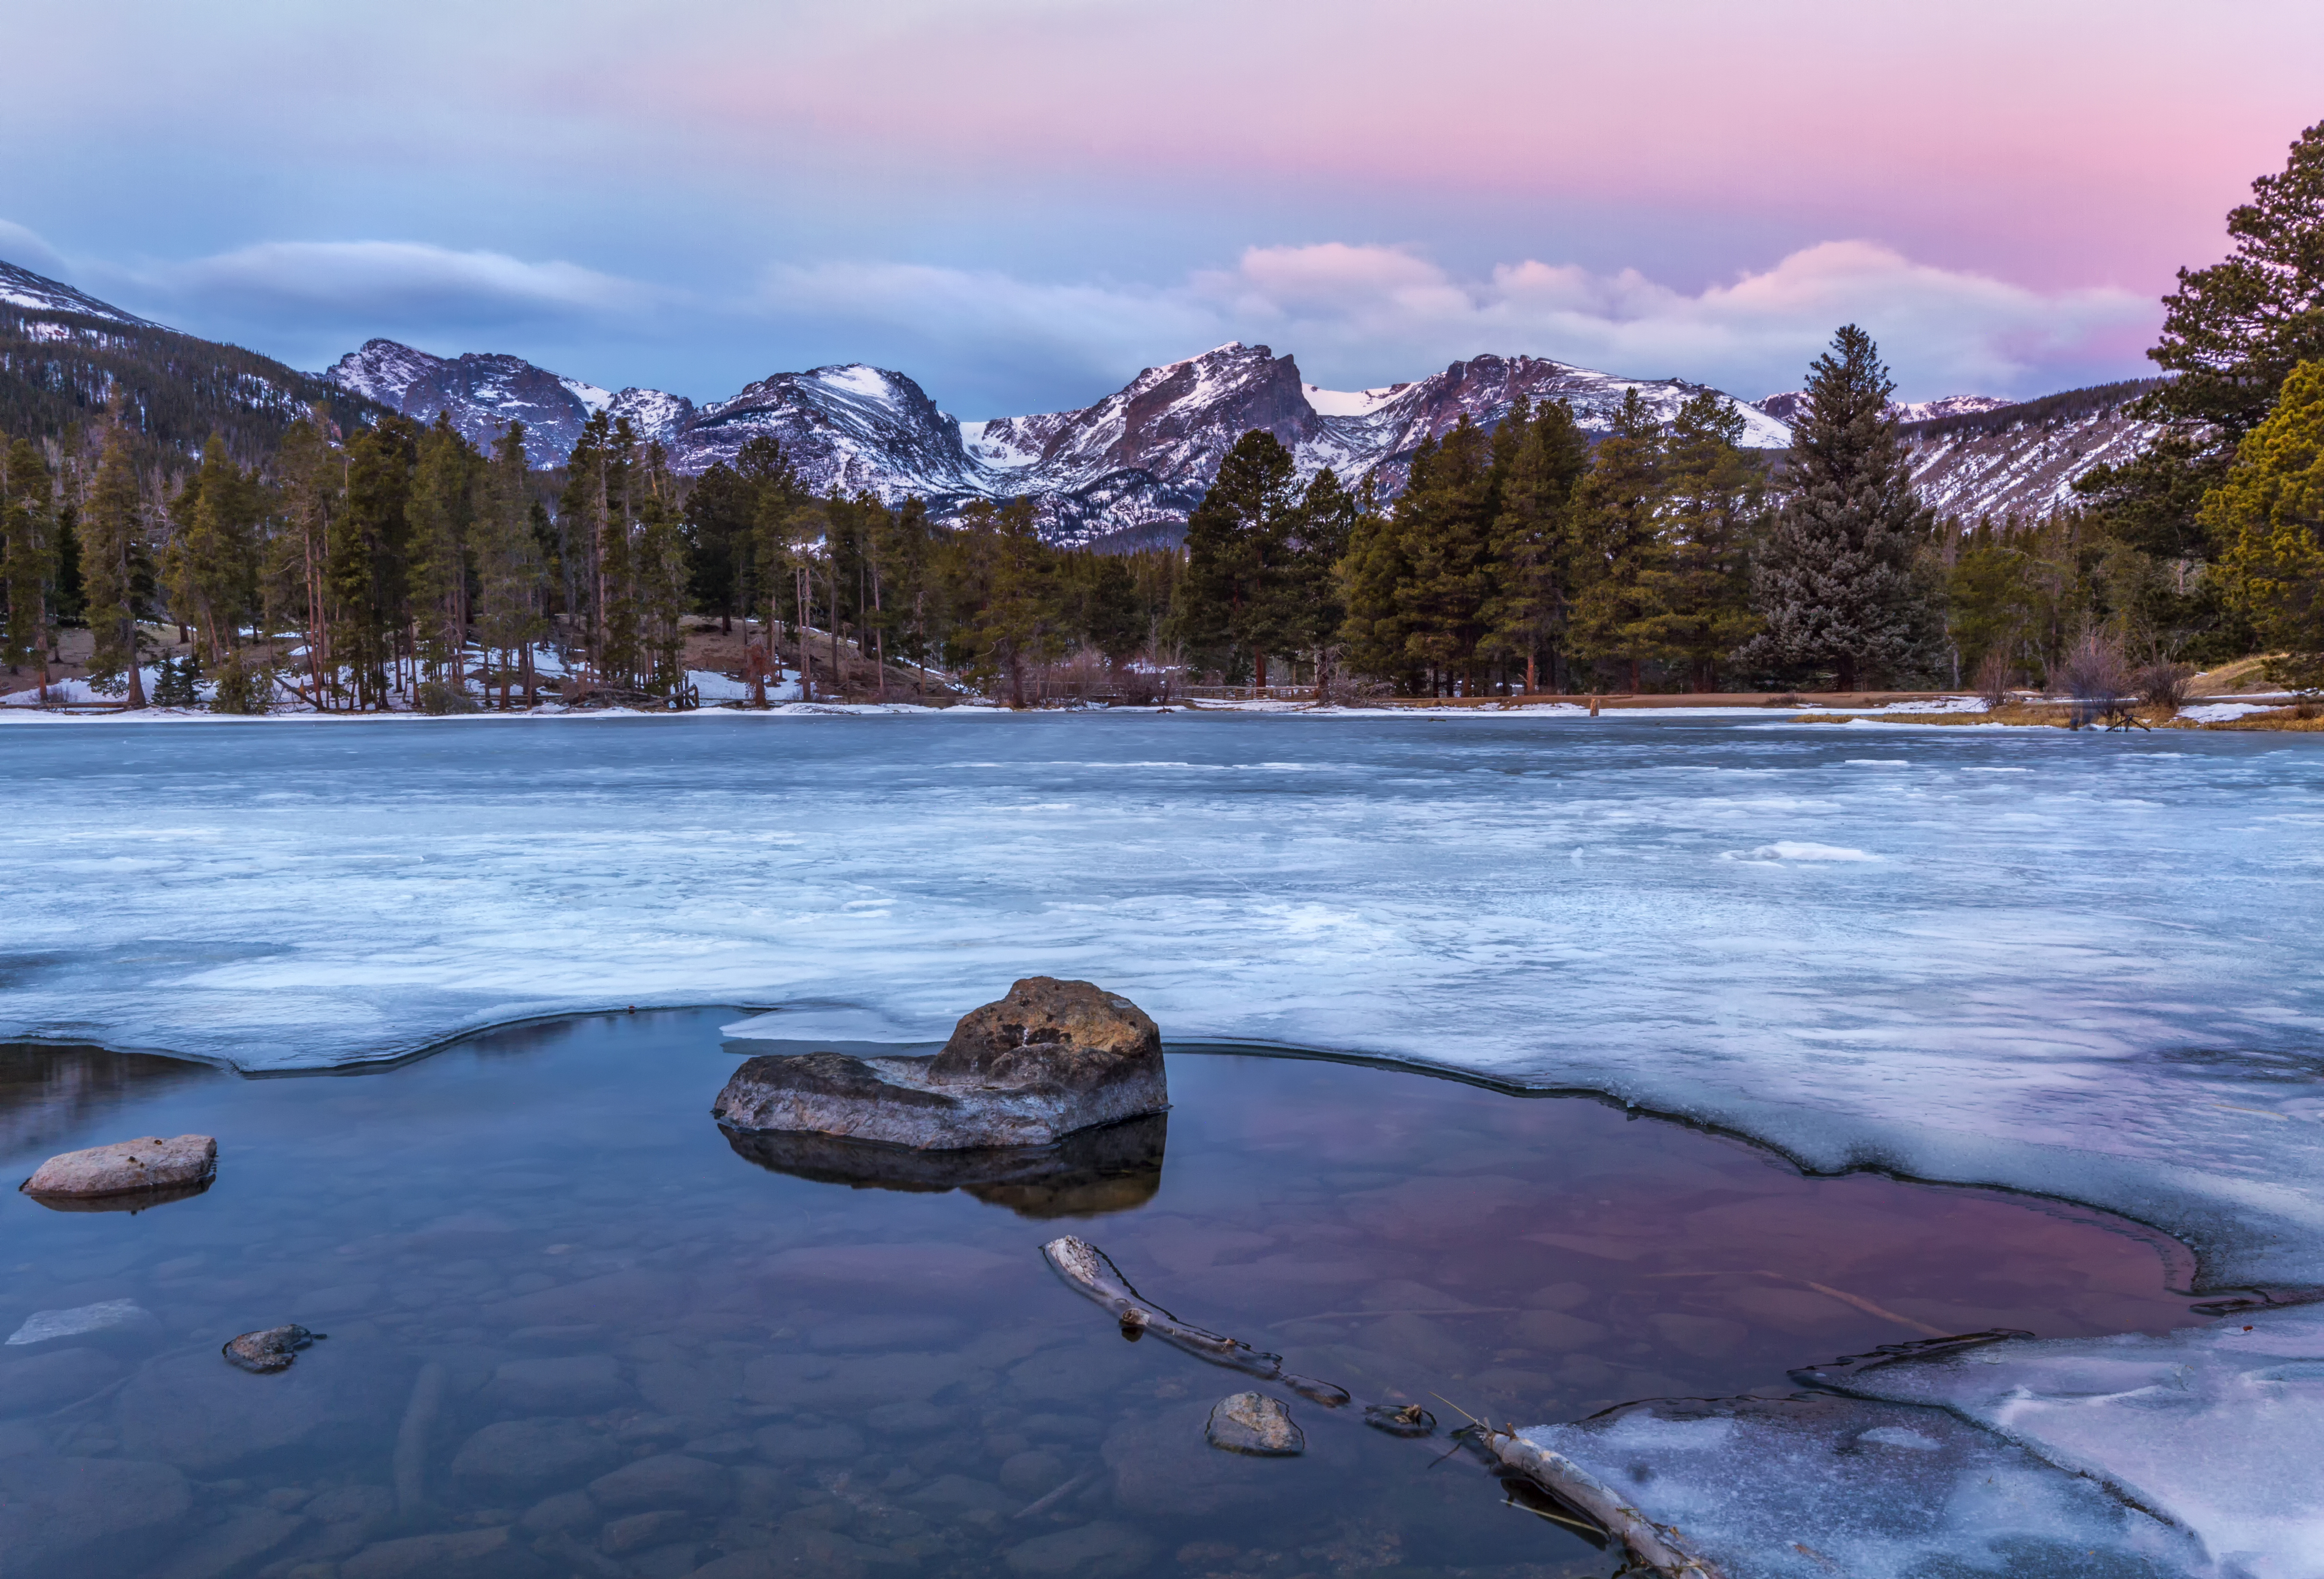 Sunrise on Sprague Lake in Rocky Mountain National park just outside of Estes Park, Colorado